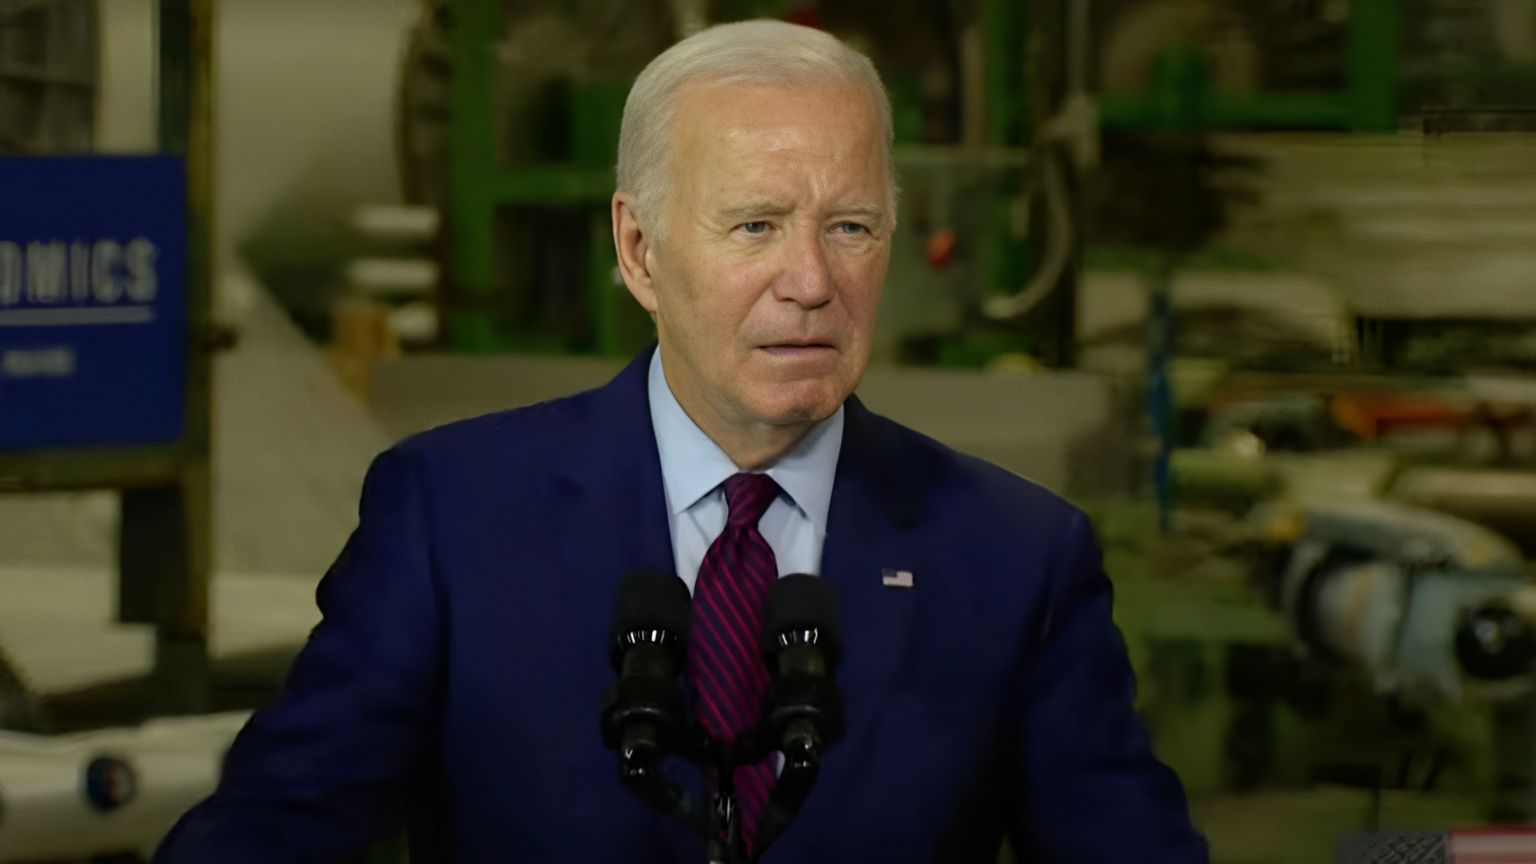 REVEALED: Facebook Felt “Pressure” From “Outraged” Biden White House To Remove Posts